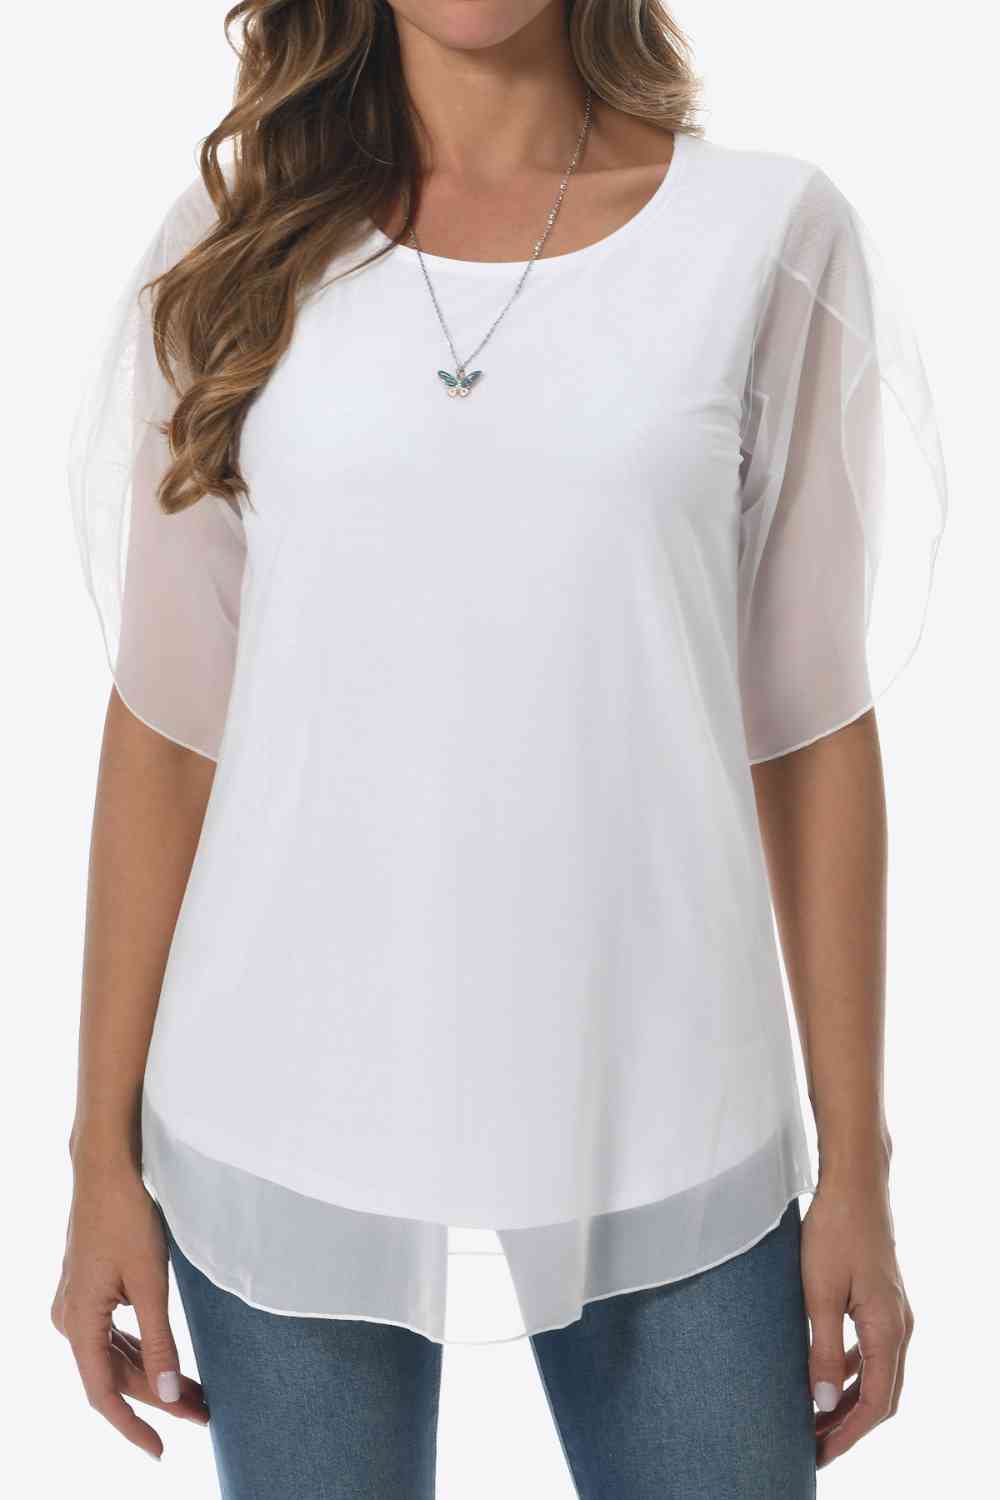 Round Neck Curved Hem Blouse - Blouses - FITGGINS